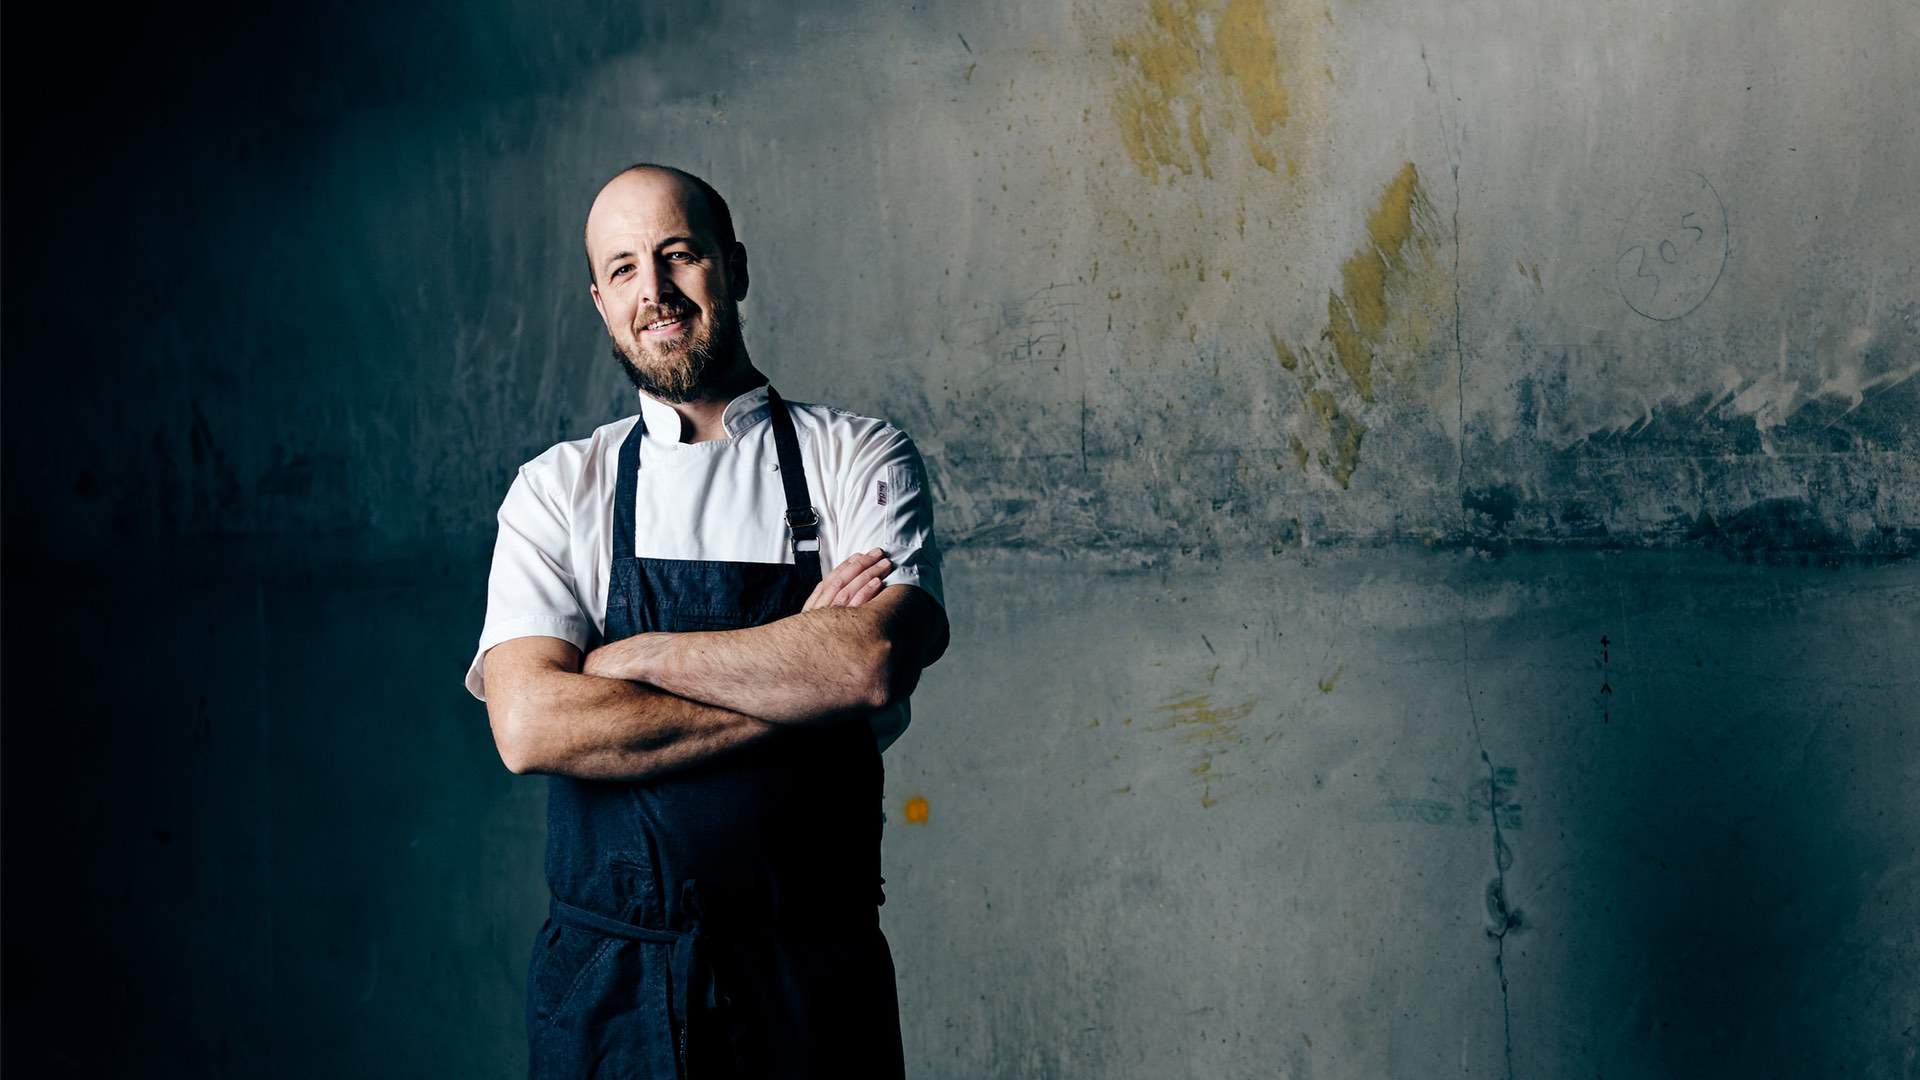 Navi Is Yarraville's New 25-Seat Restaurant From Acclaimed Chef Julian Hills